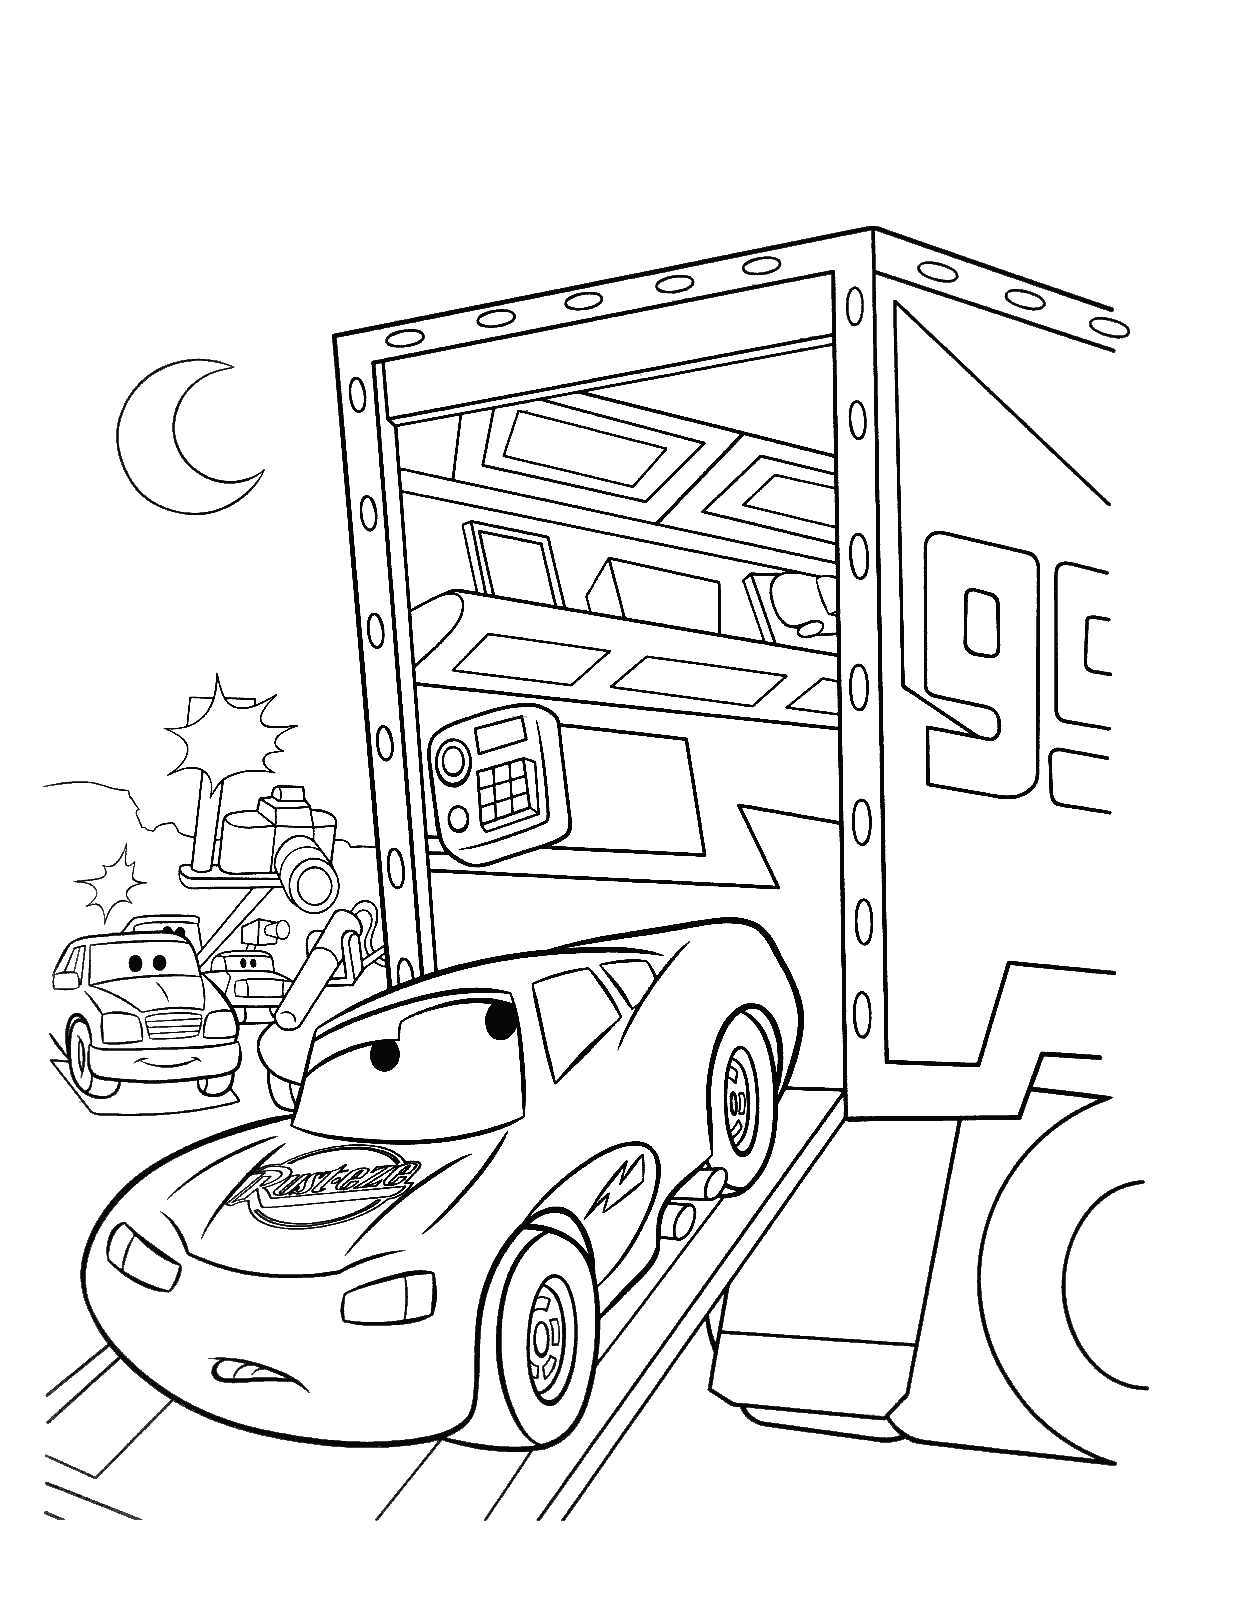 cars-to-color-for-kids-cars-kids-coloring-pages